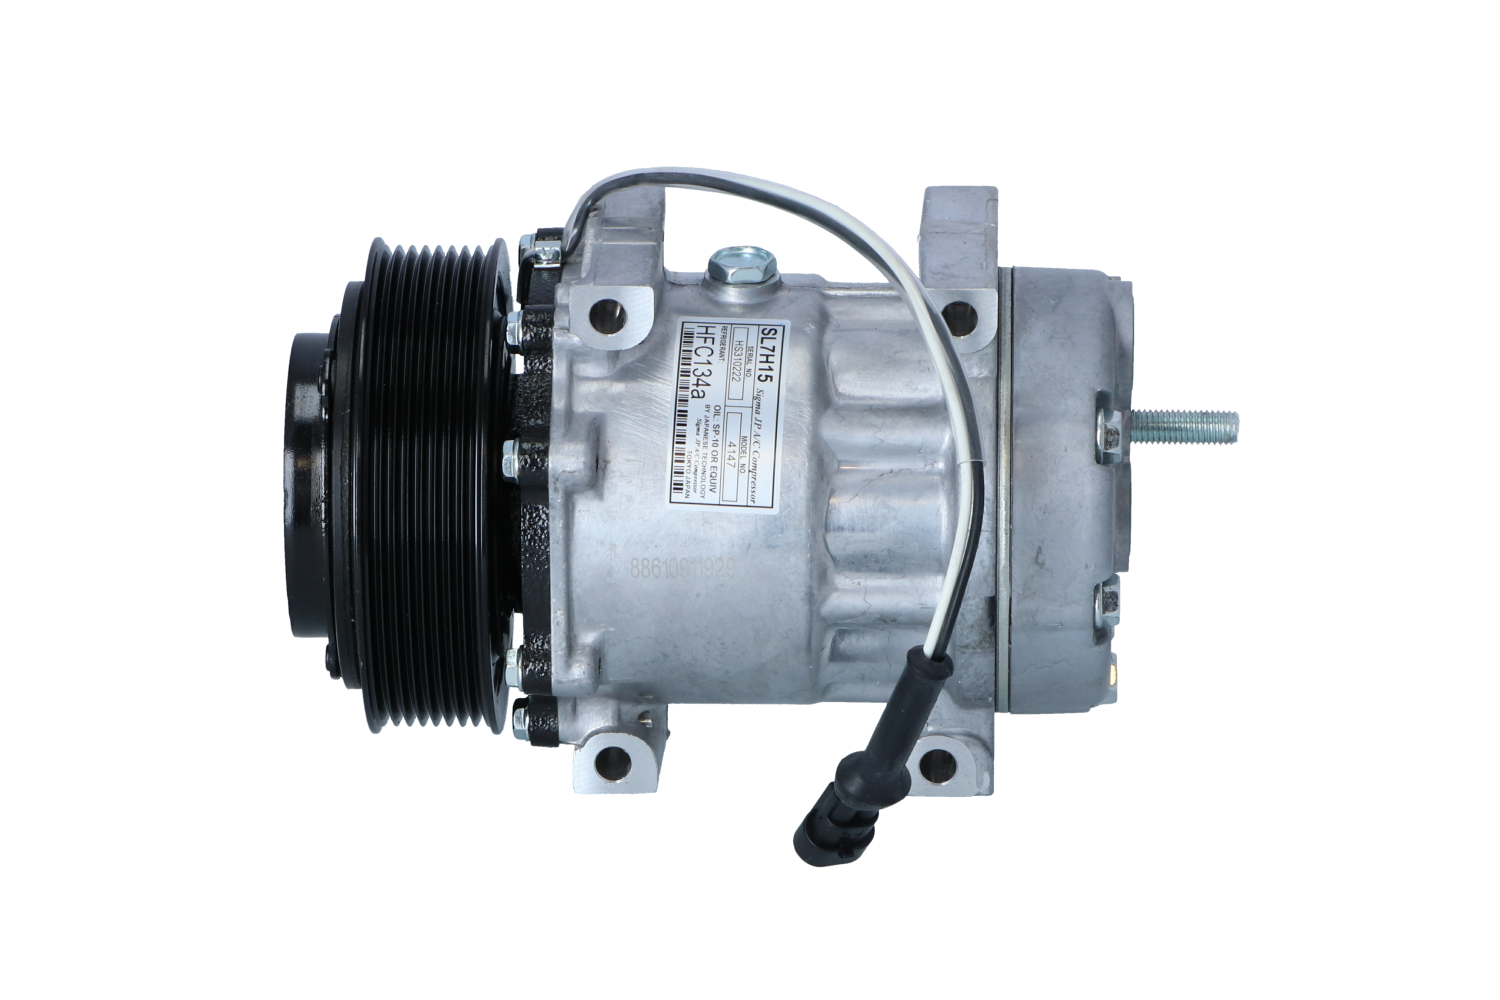 NRF 32780 Air conditioning compressor SD7H15, 24V, PAG 100, with PAG compressor oil, with seal ring